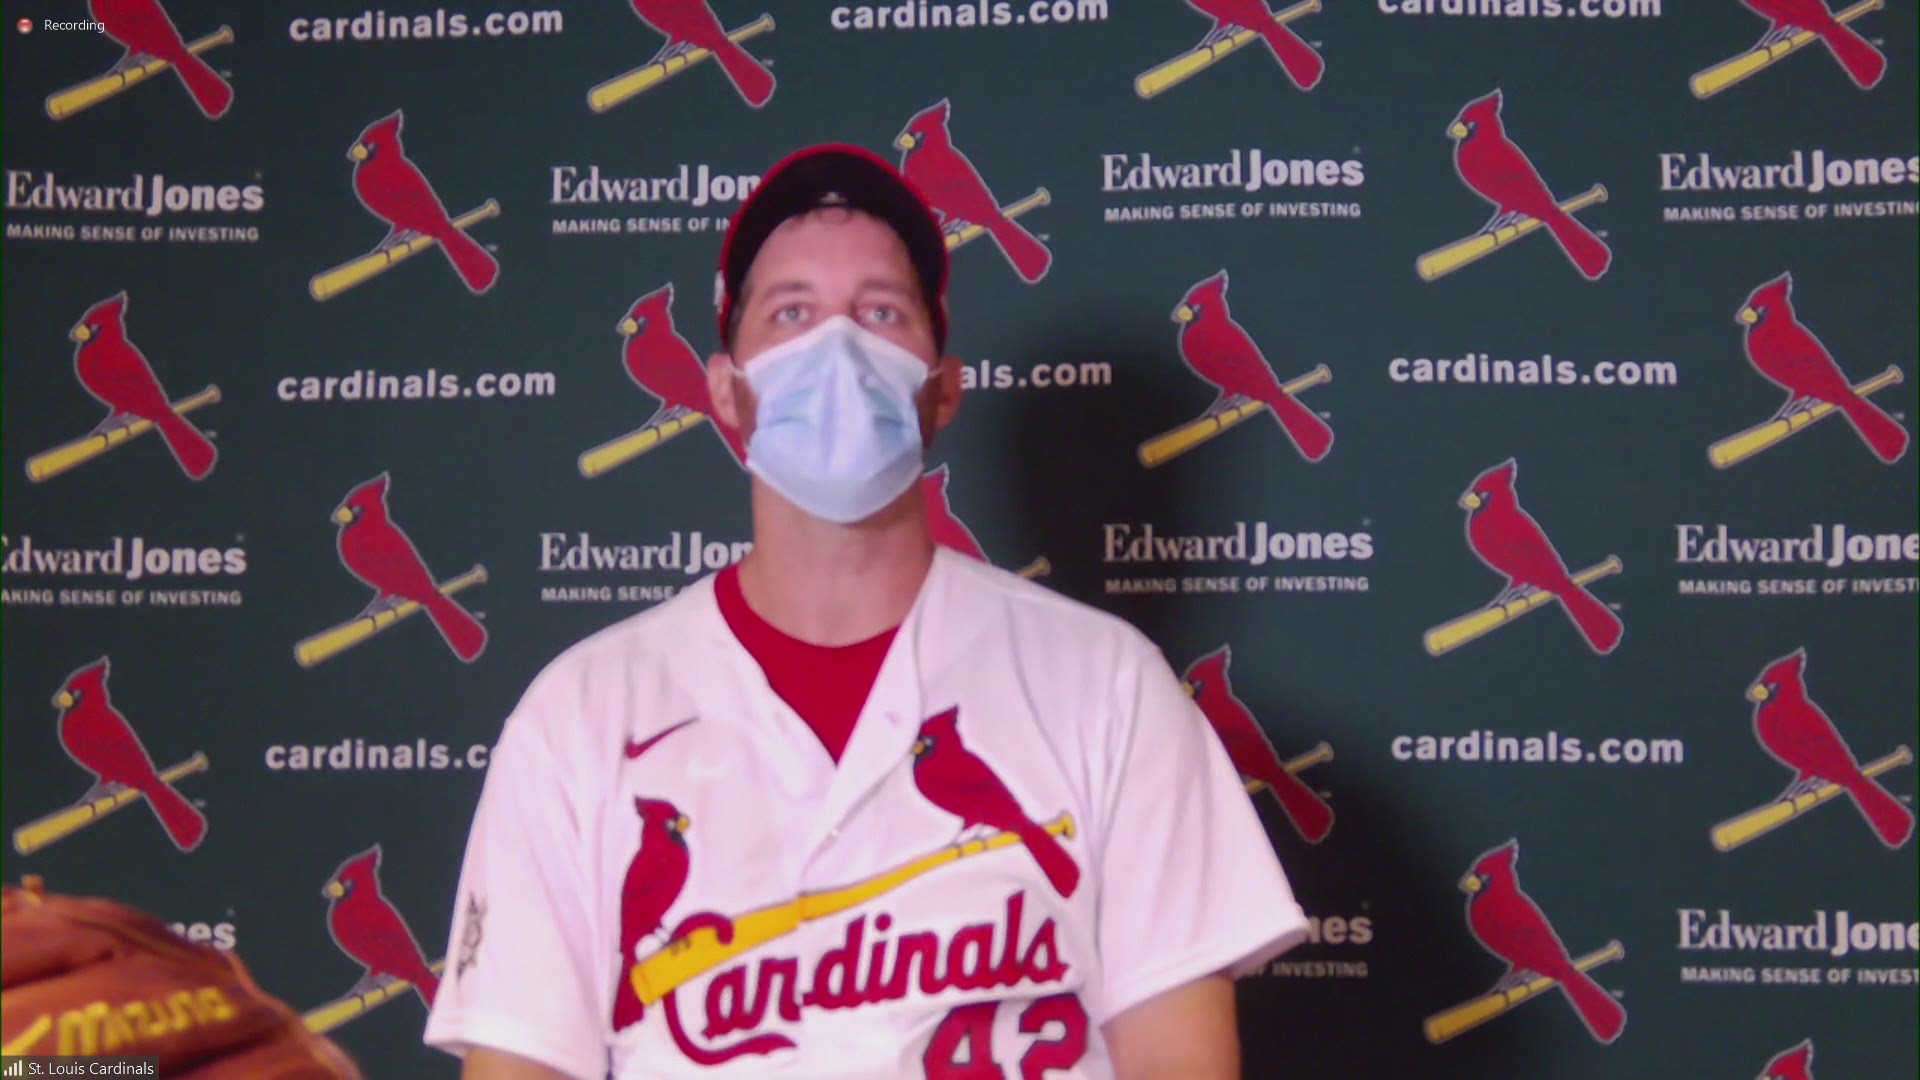 The one in which I get (over)emotional about Adam Wainwright